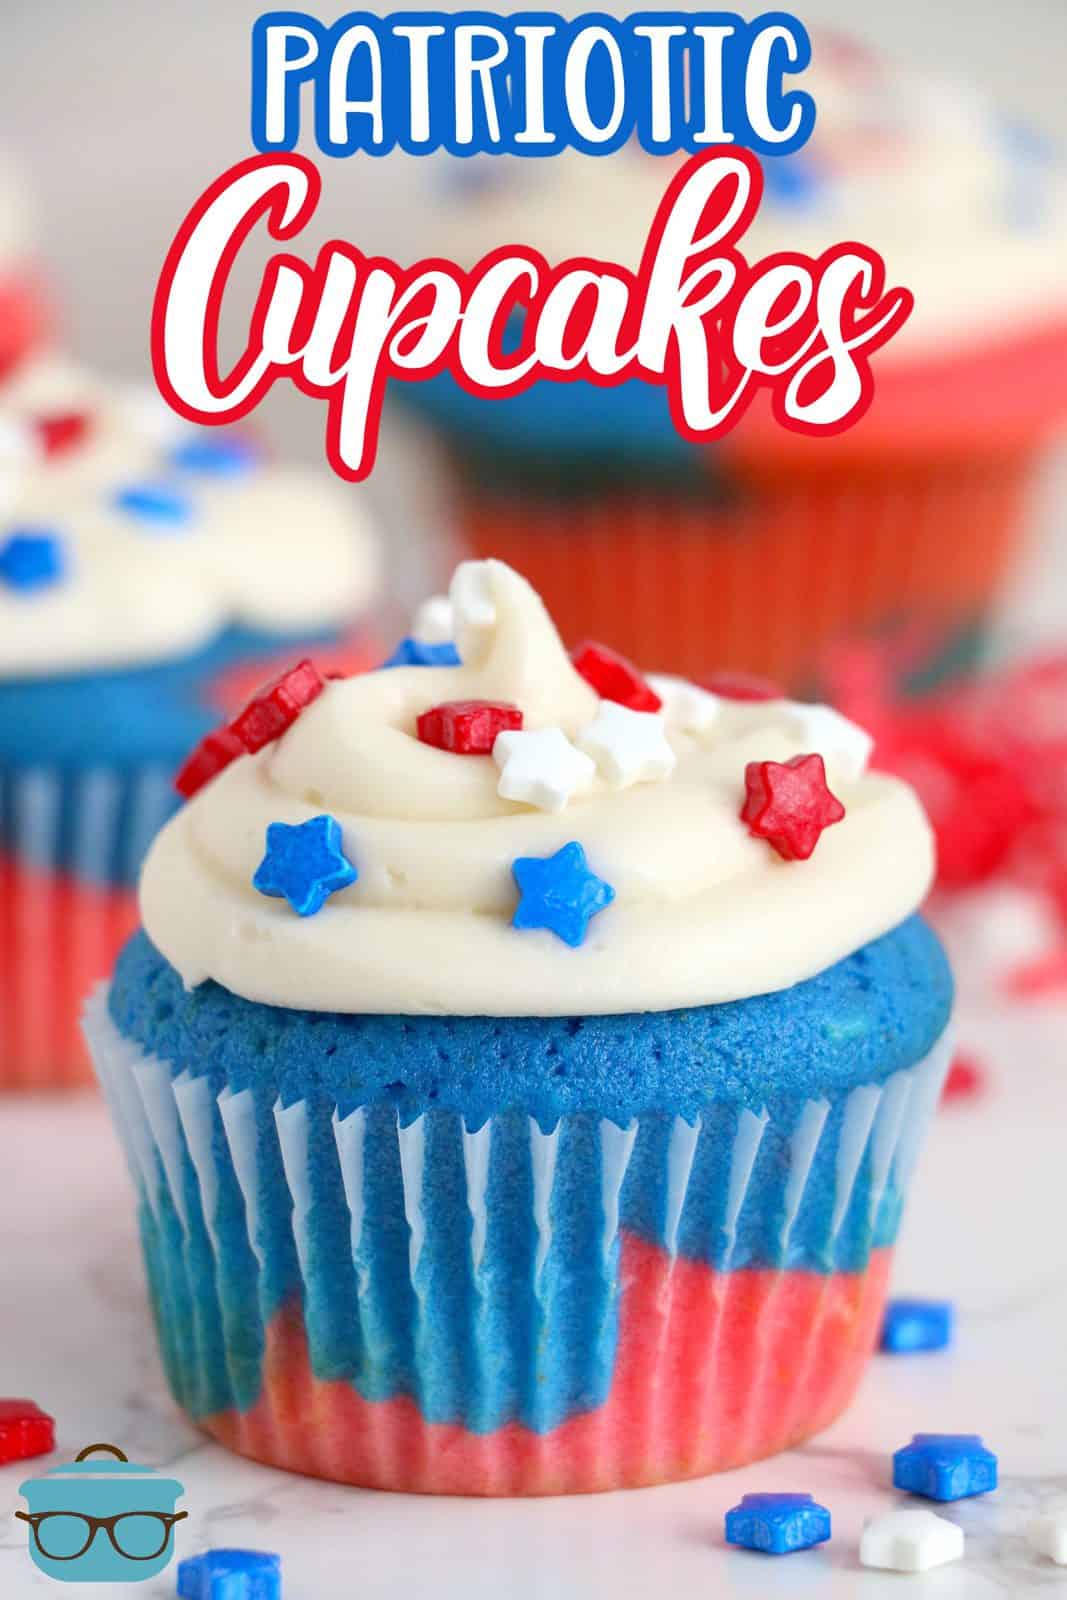 Pinterest image of finished and decorated Red, White and Blue Cupcakes.